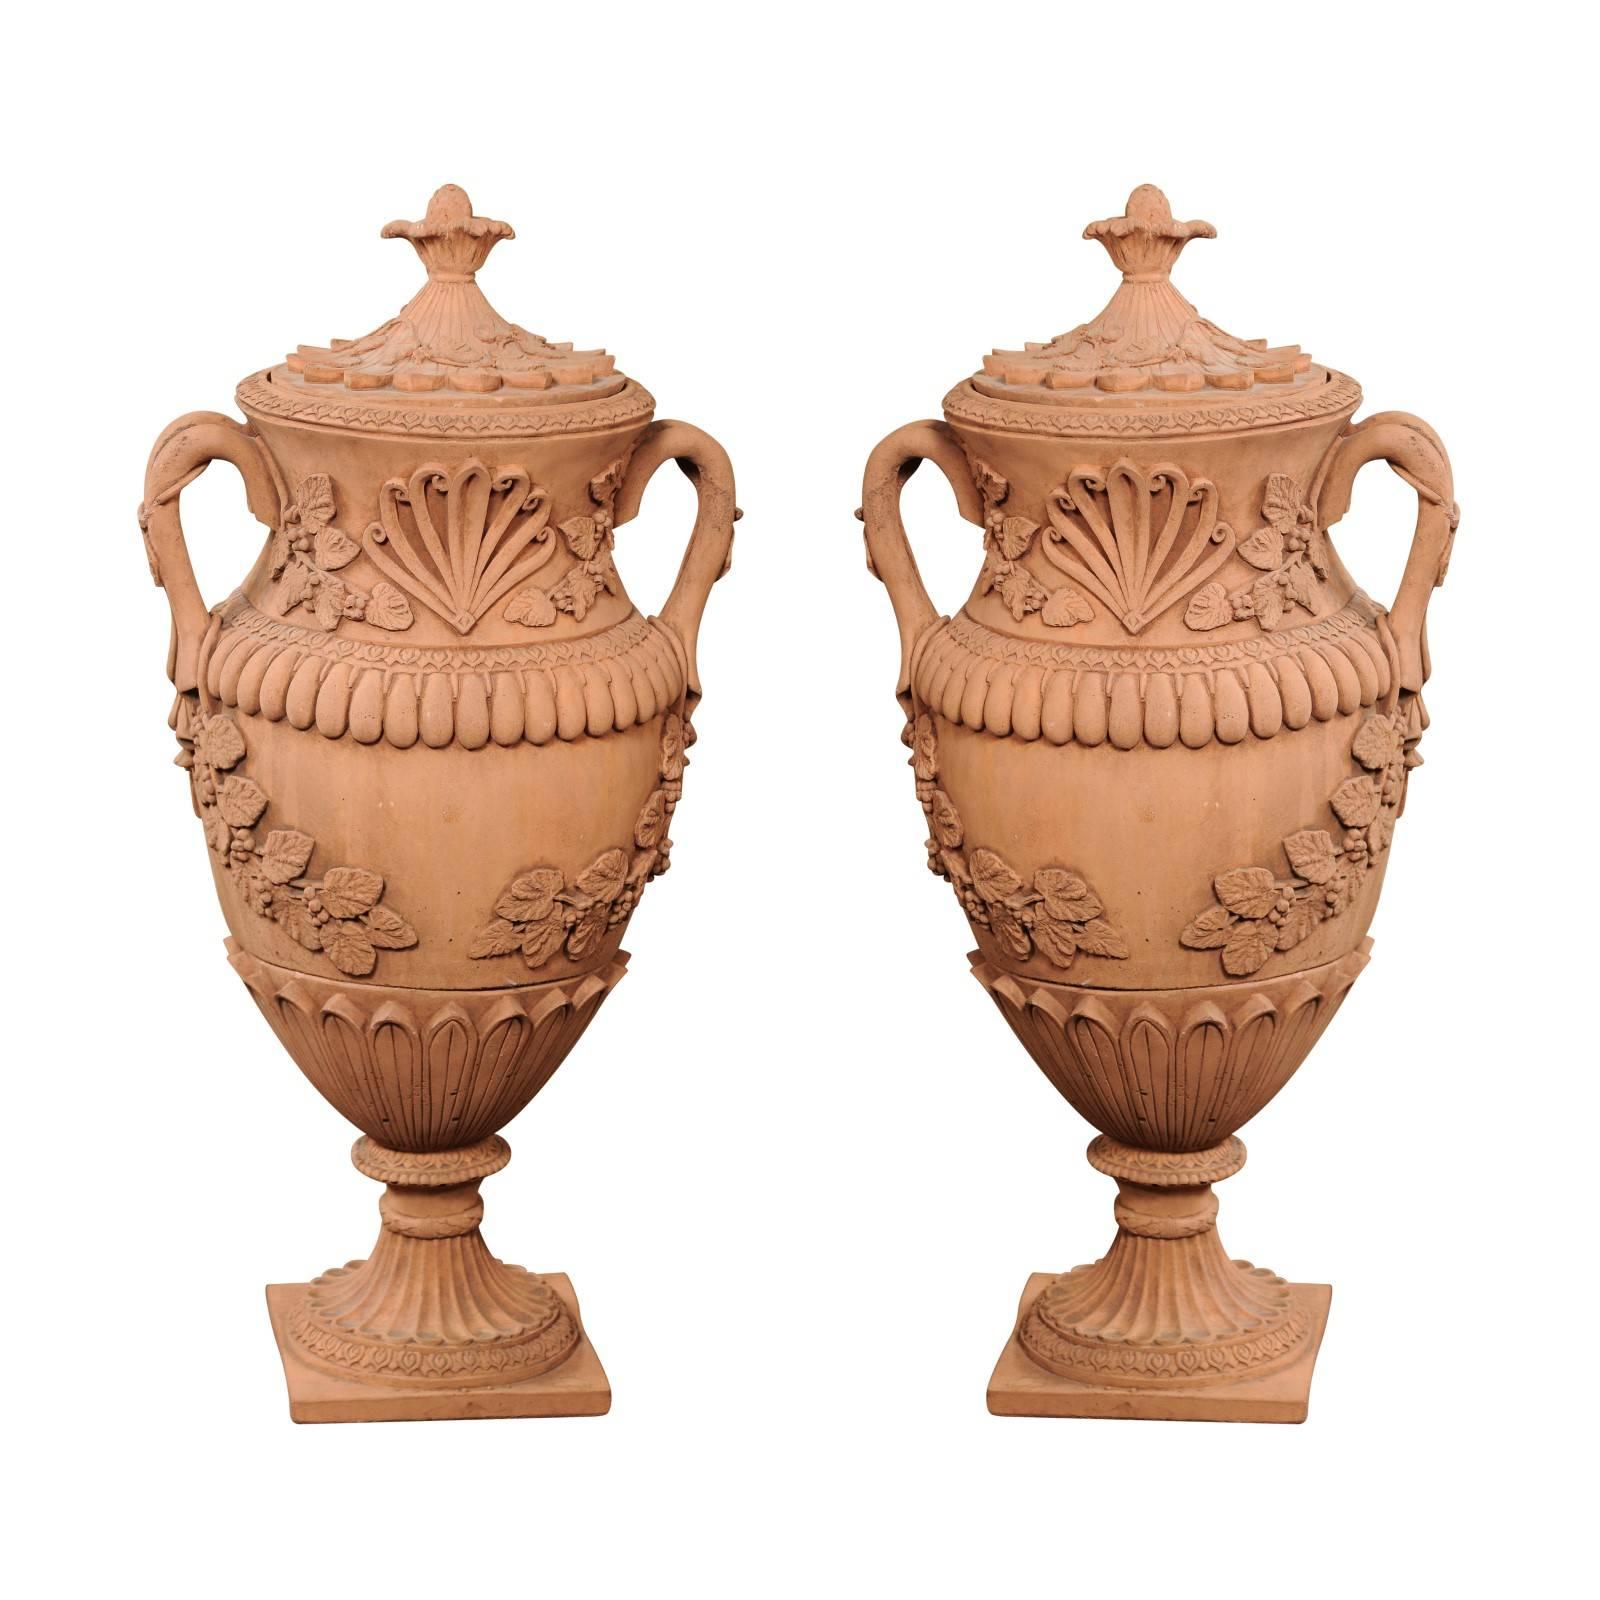 Pair of 1930s Oversized Vintage French Terracotta Urns with Lid and Handles